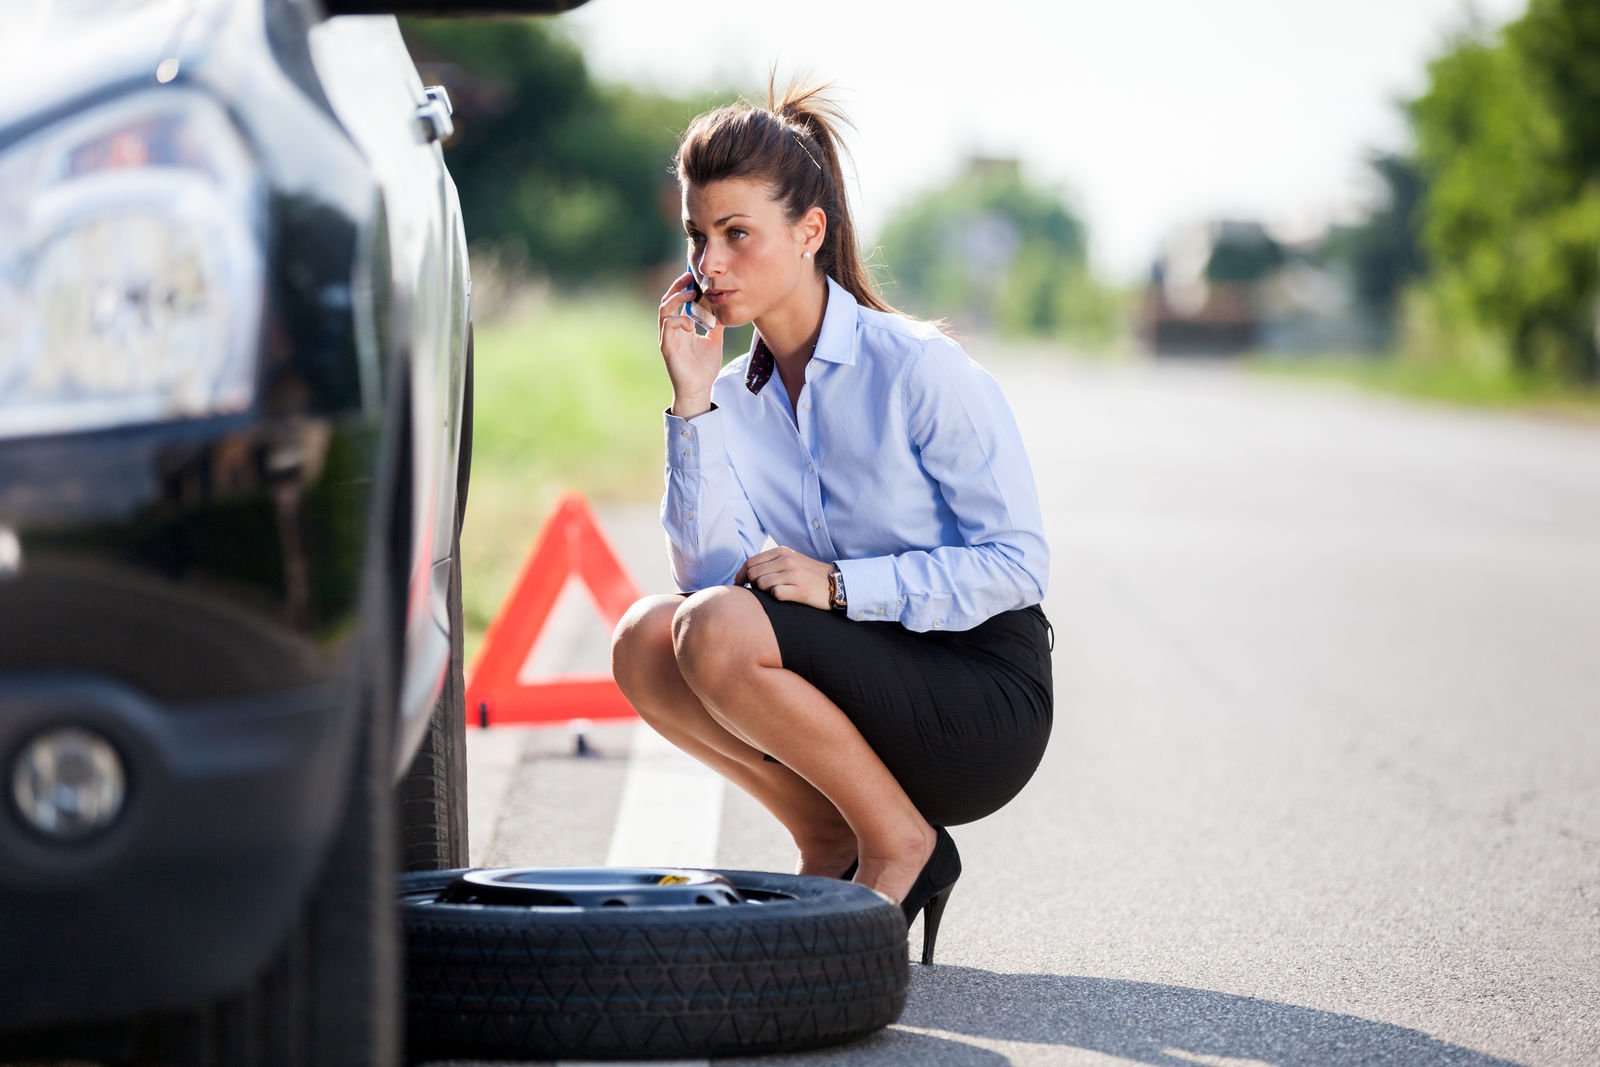 Does car insurance cover roadside assistance?